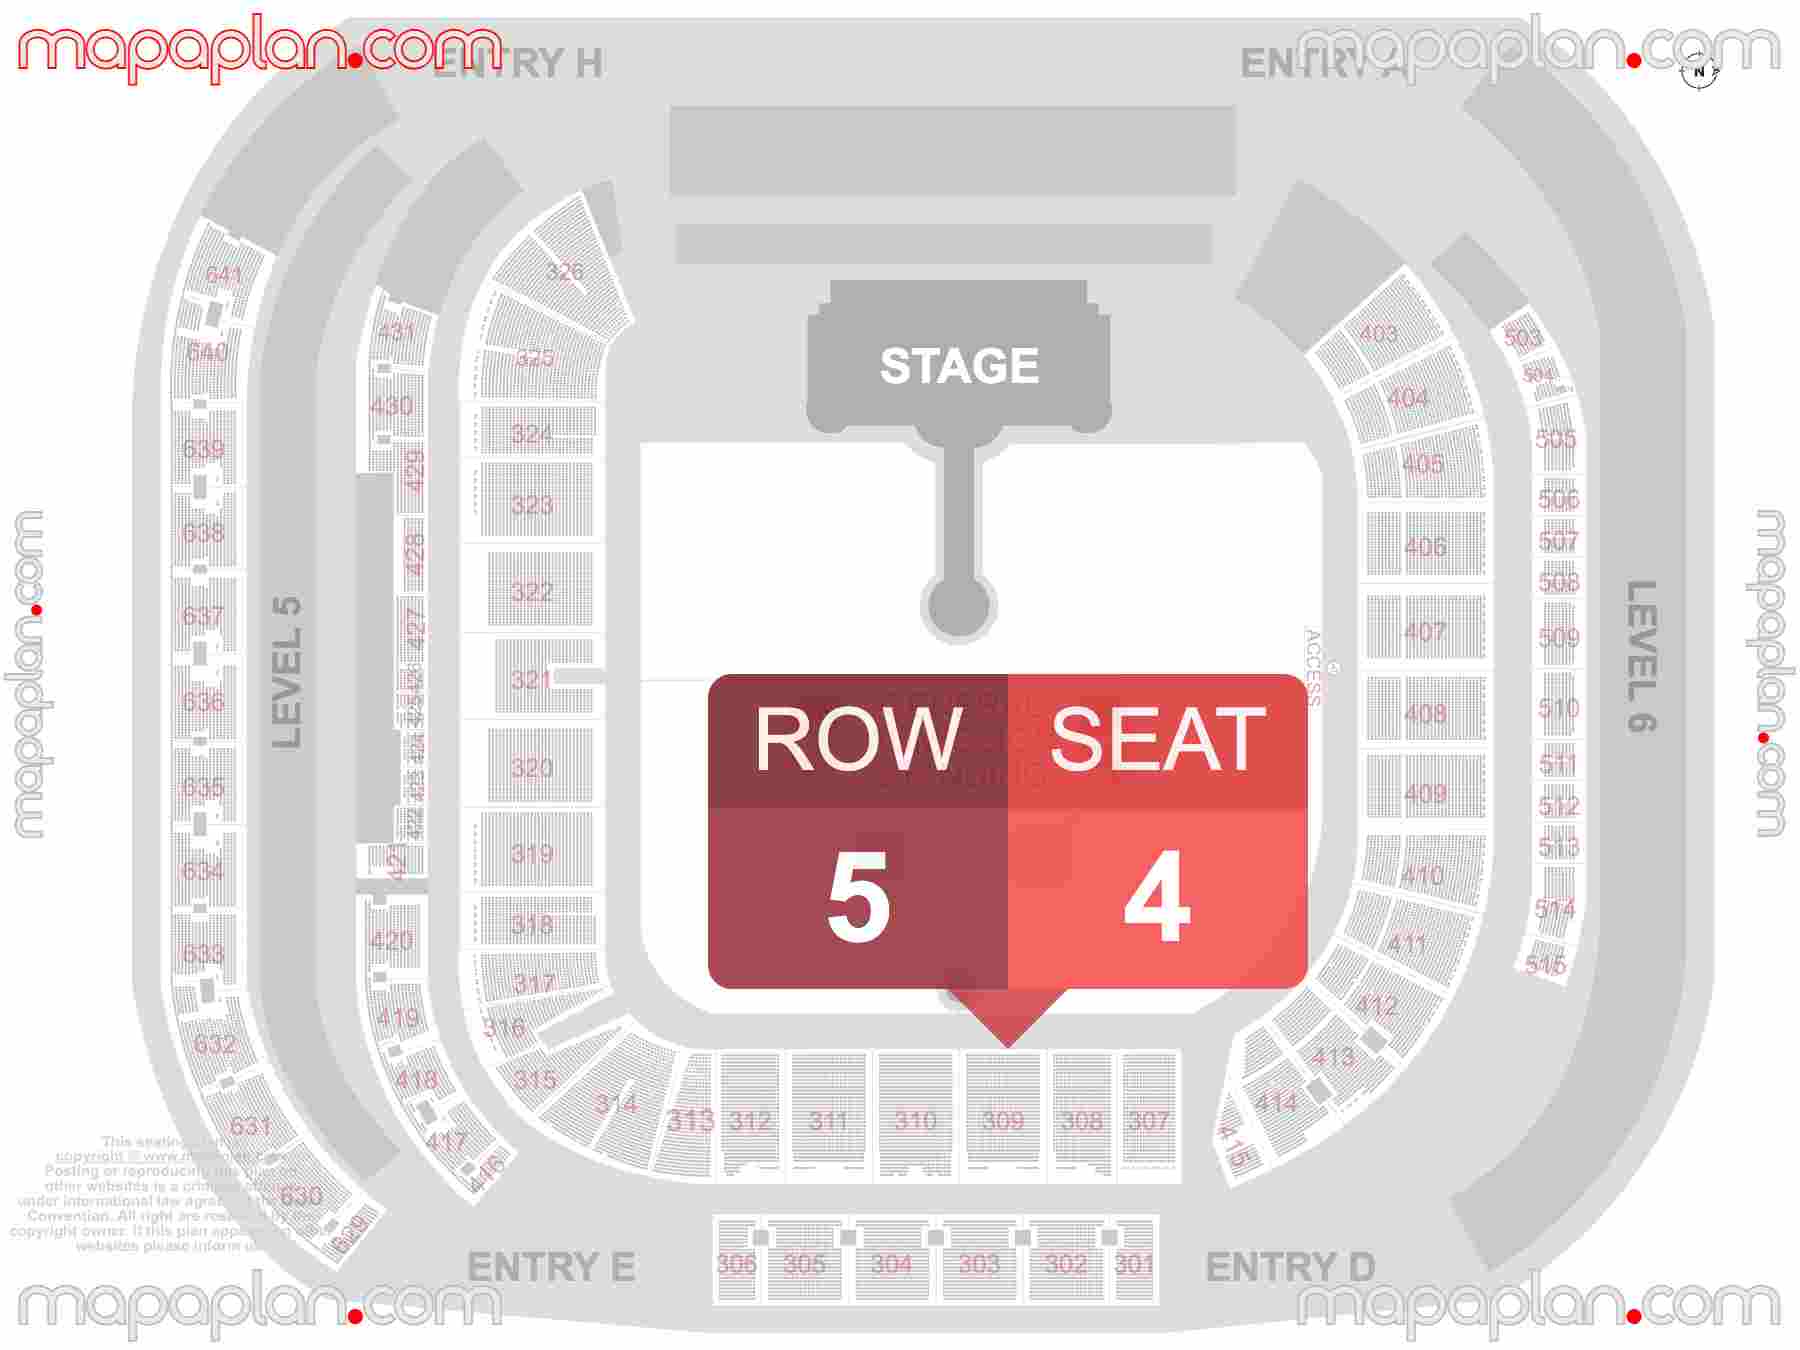 Auckland Eden Park Stadium seating map Concert detailed seat numbers and row numbering map with interactive map plan layout